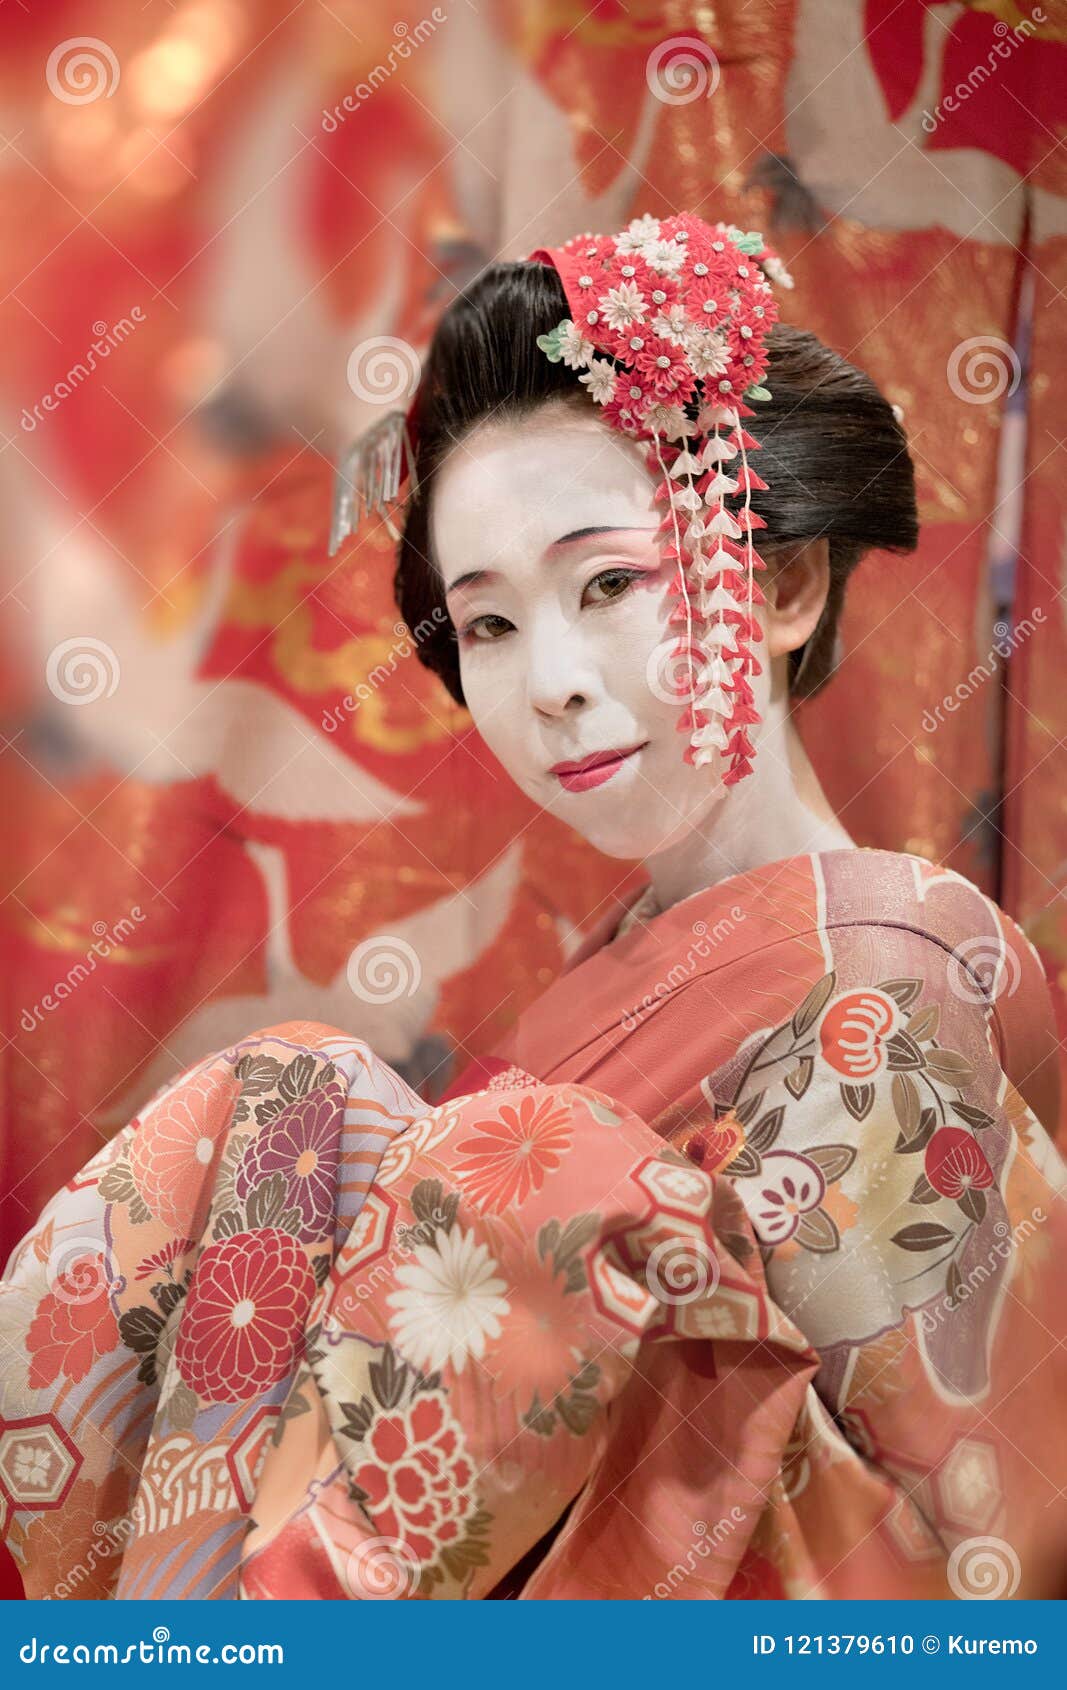 A woman dressed in the | Stock Photo